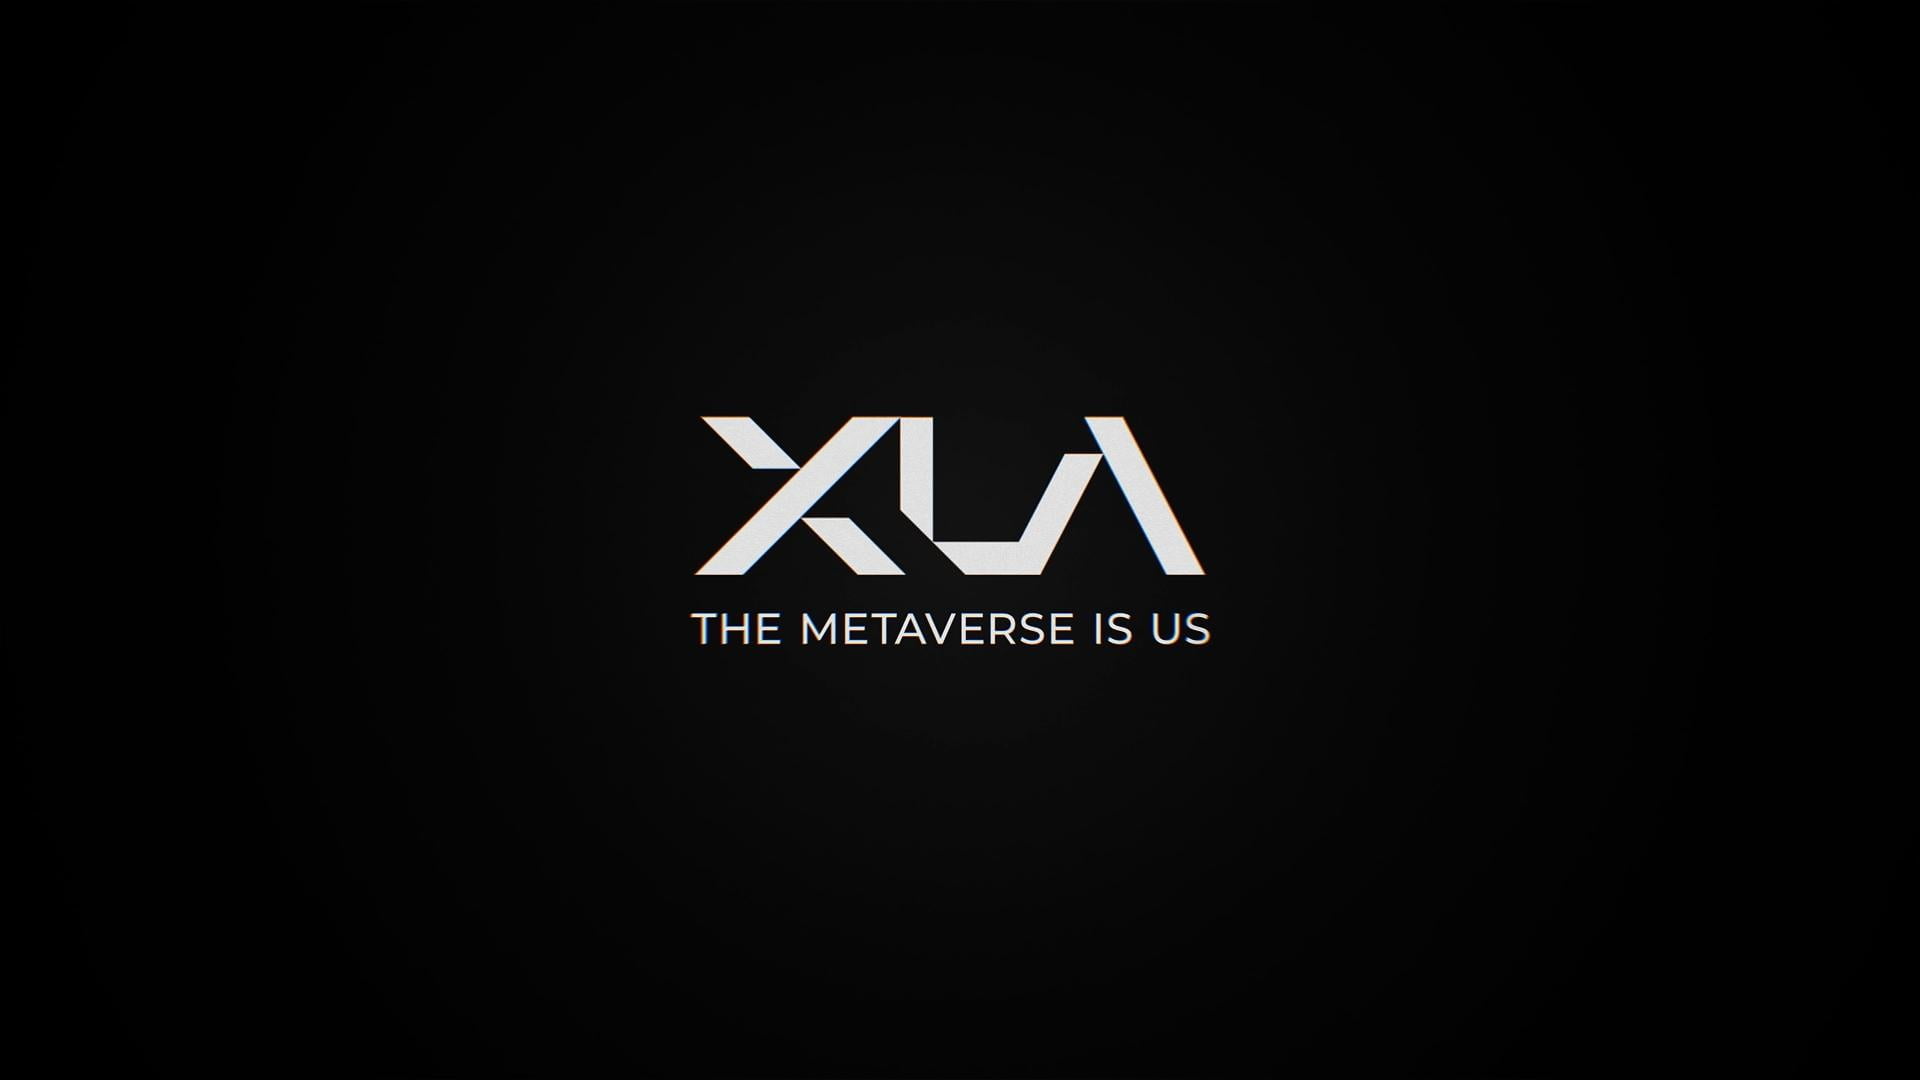 The X.LA Metaverse Revealed In Detail 2